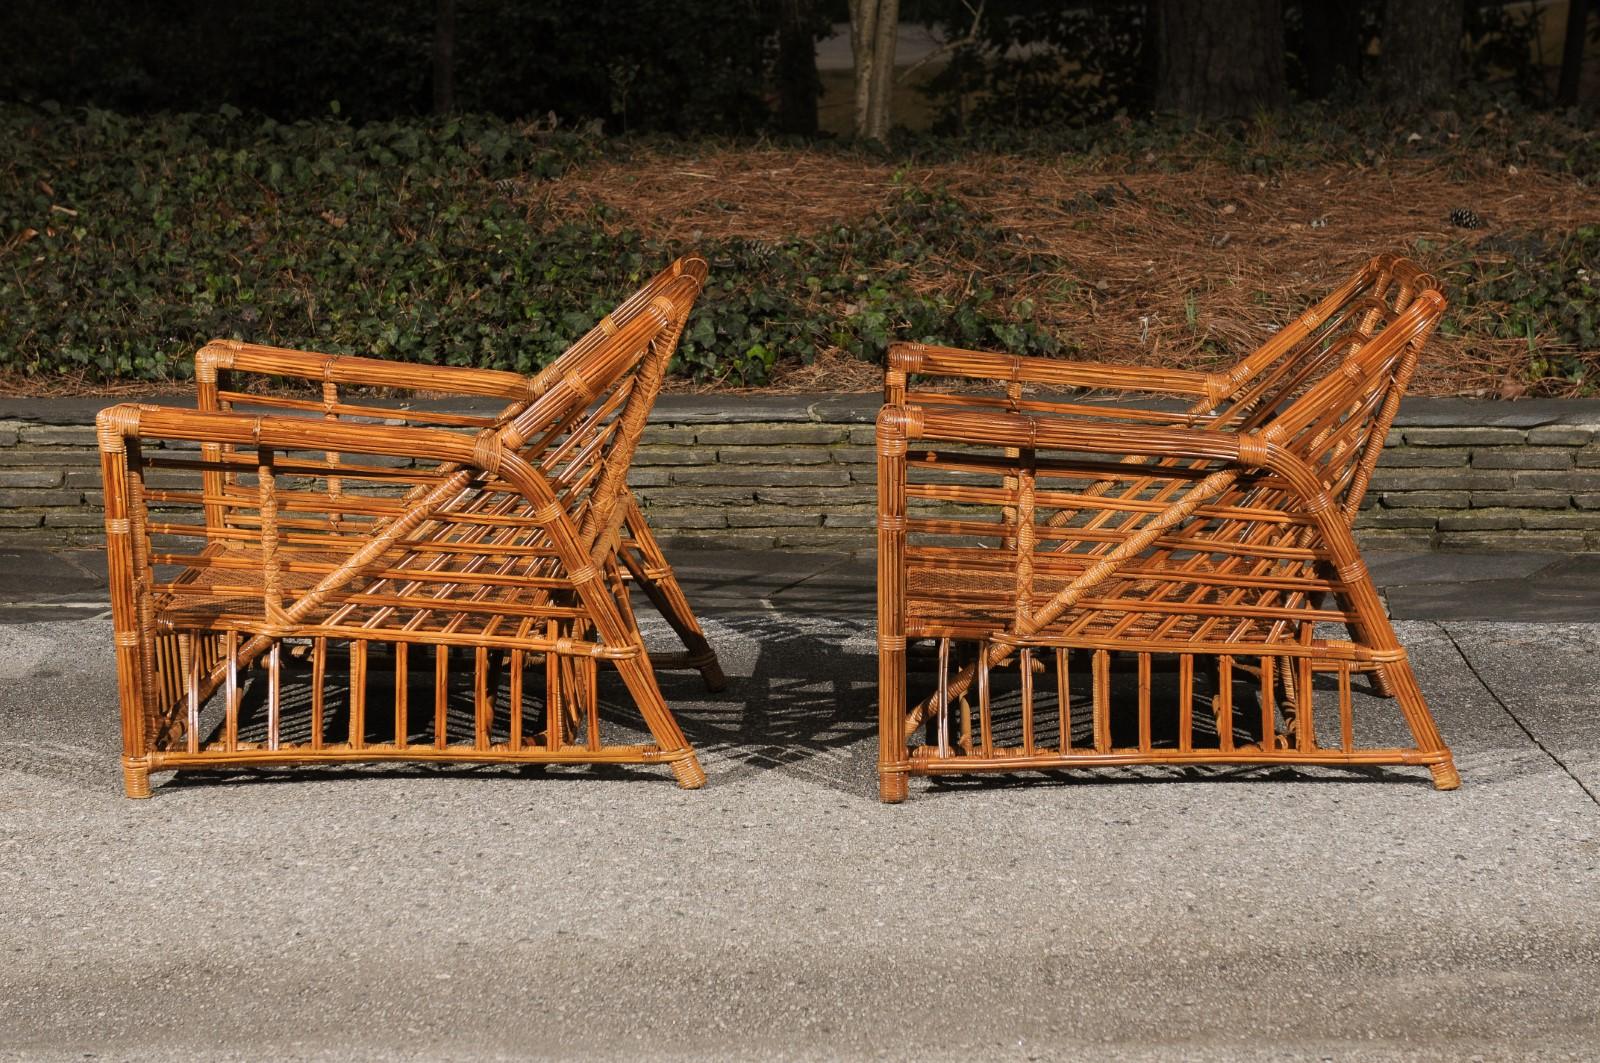 Exquisite Restored Pair of Modern President's Loungers by McGuire, circa 1985 For Sale 6